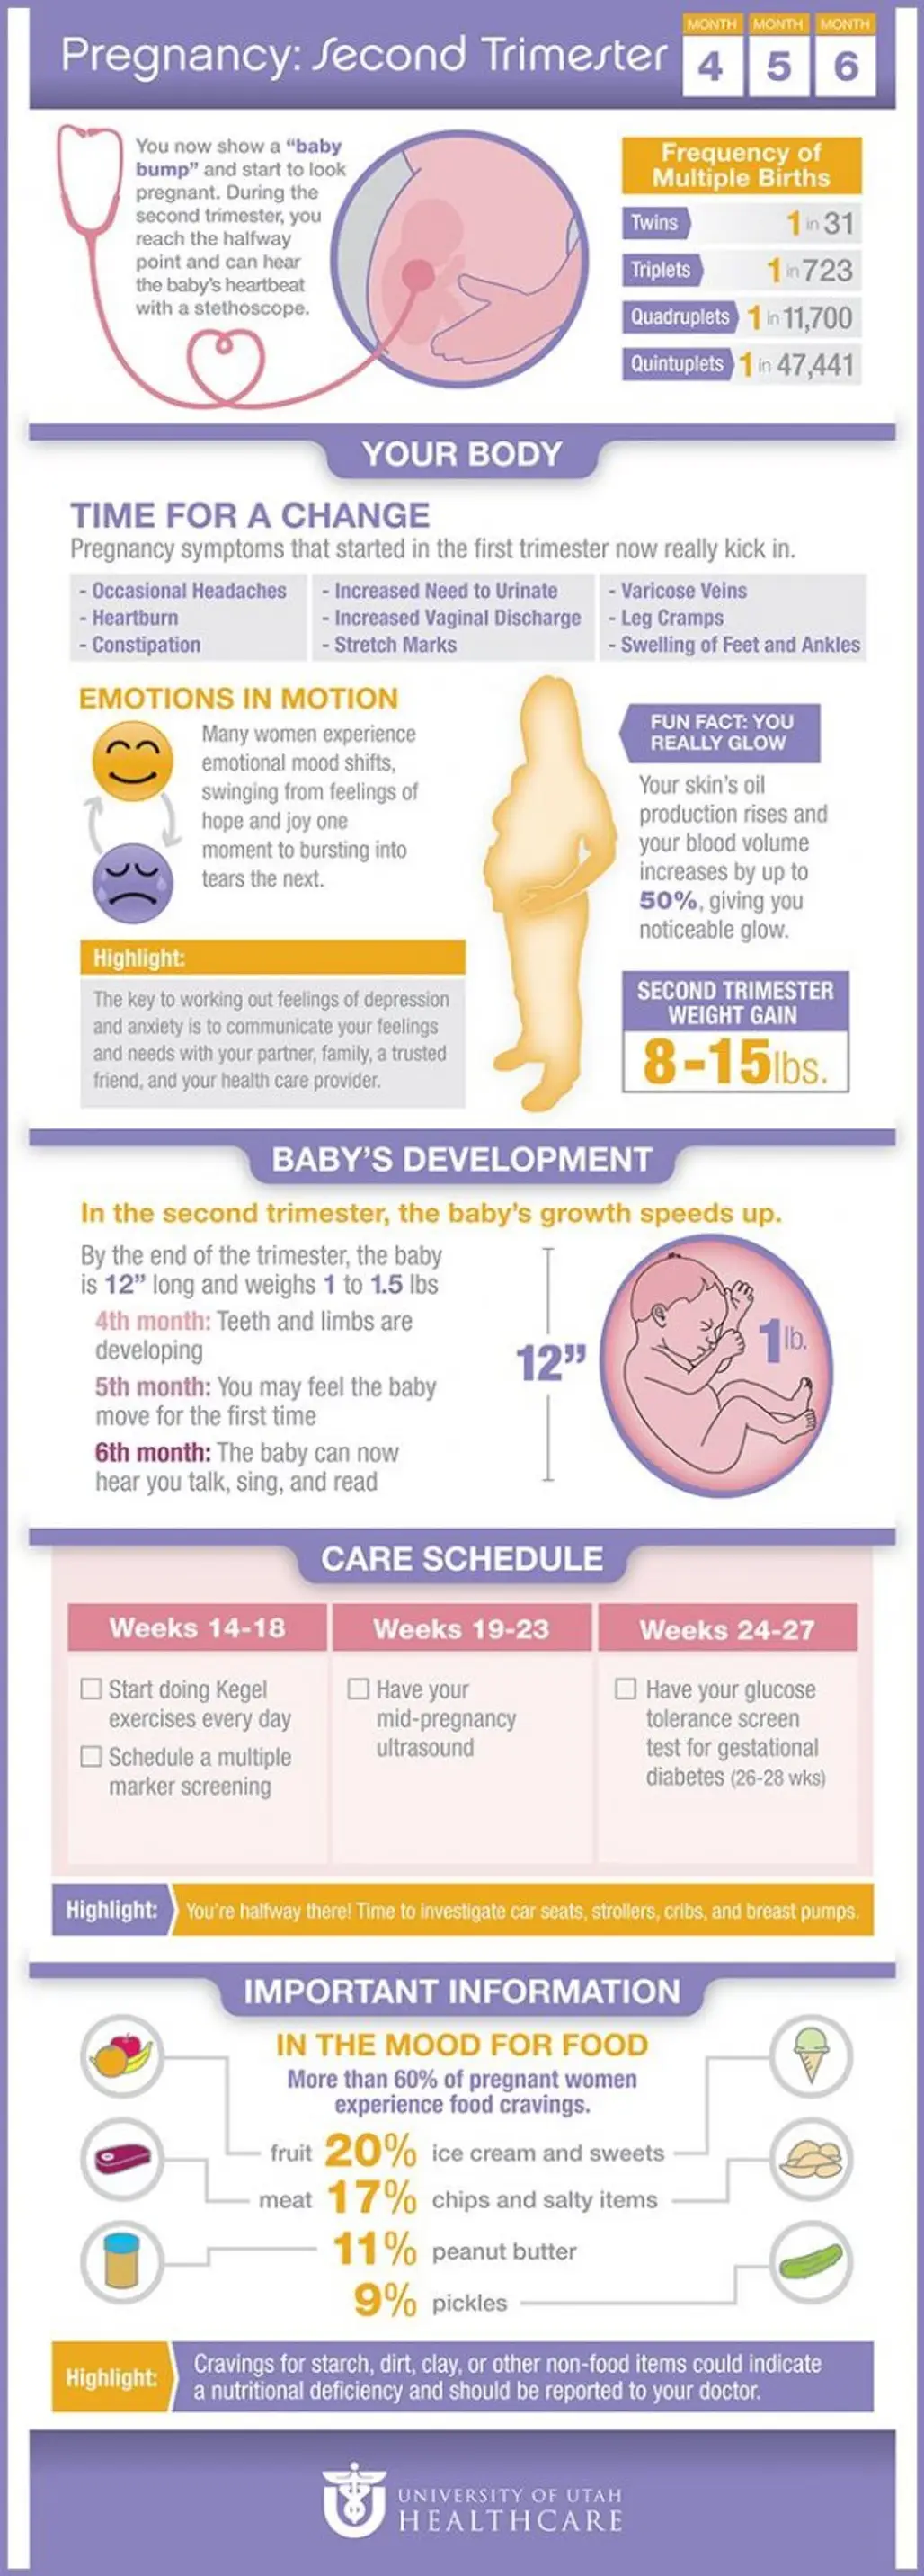 Facts about the Second Trimester of Pregnancy